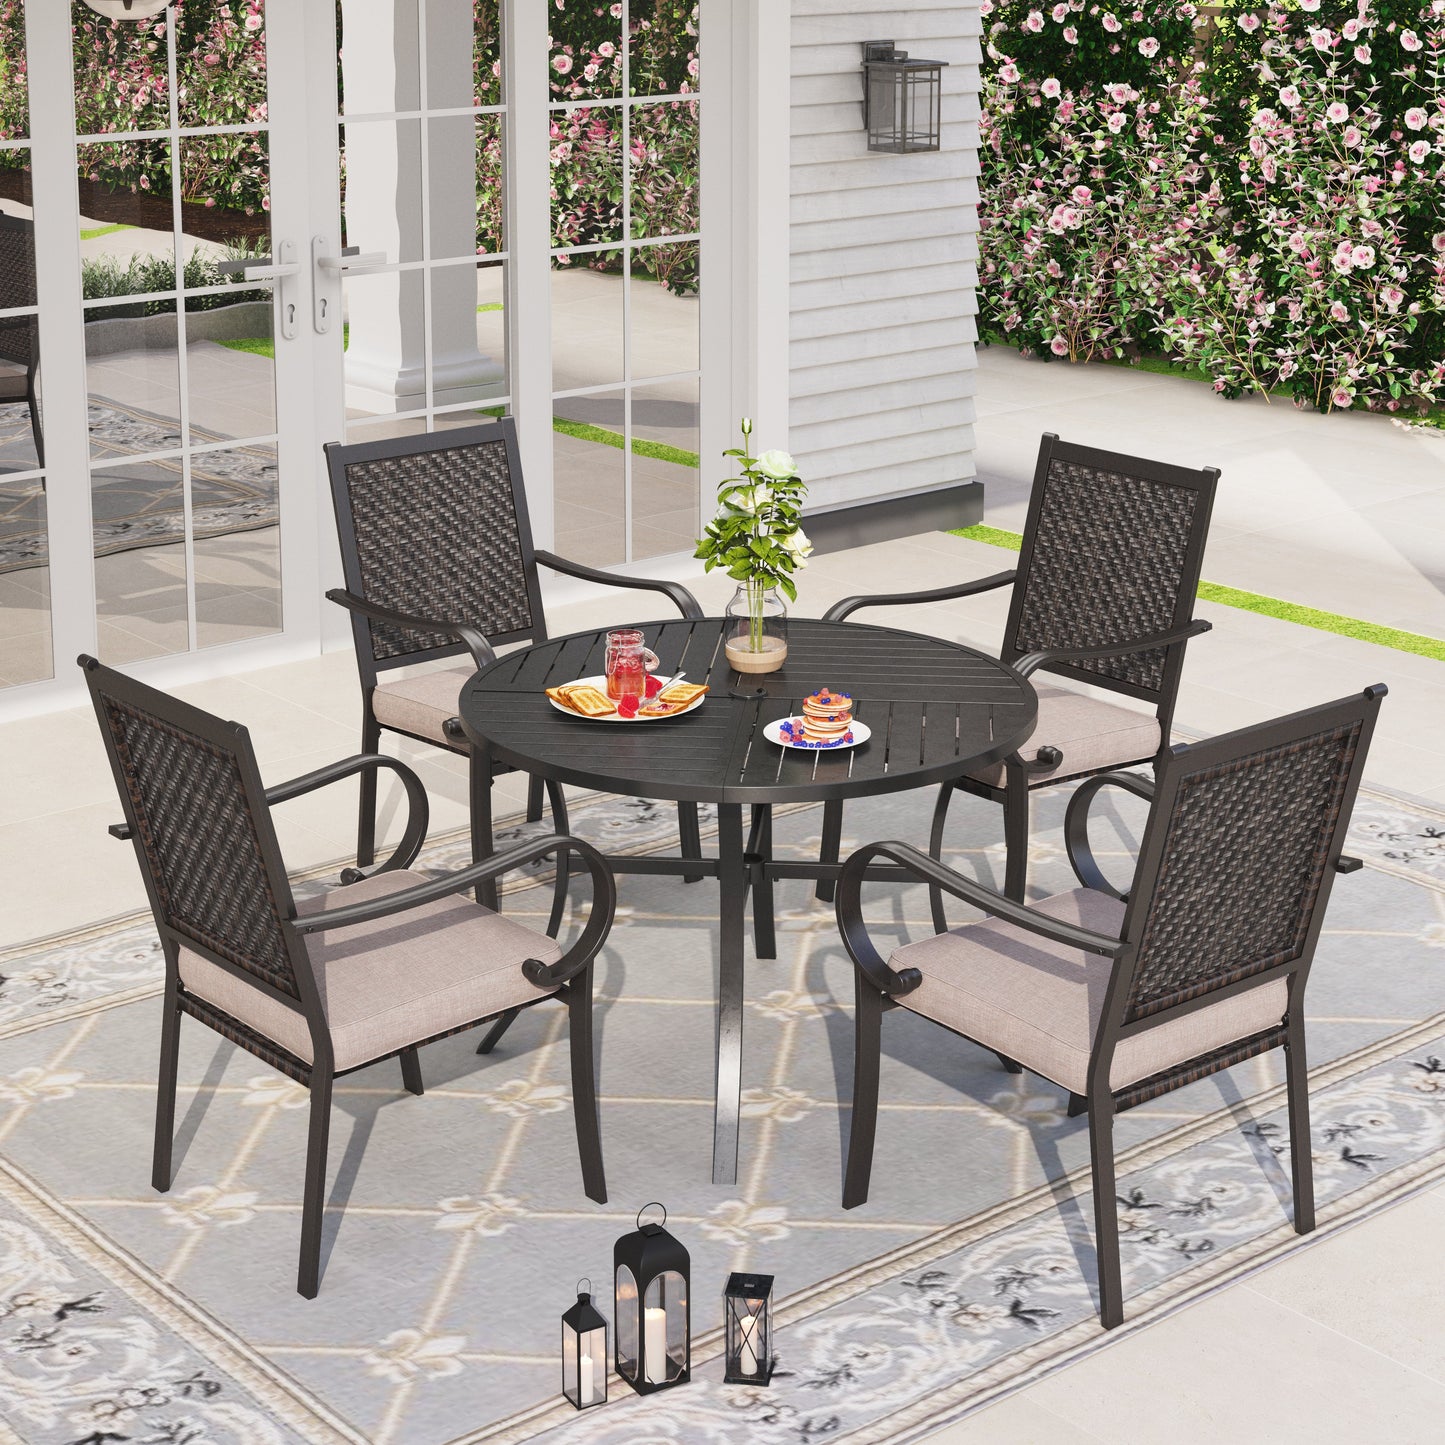 Sophia & William 5 Pieces Outdoor Patio Dining Set with 4 Wicker Rattan Cushioned Chairs & 1 Round Metal Table for 4-person